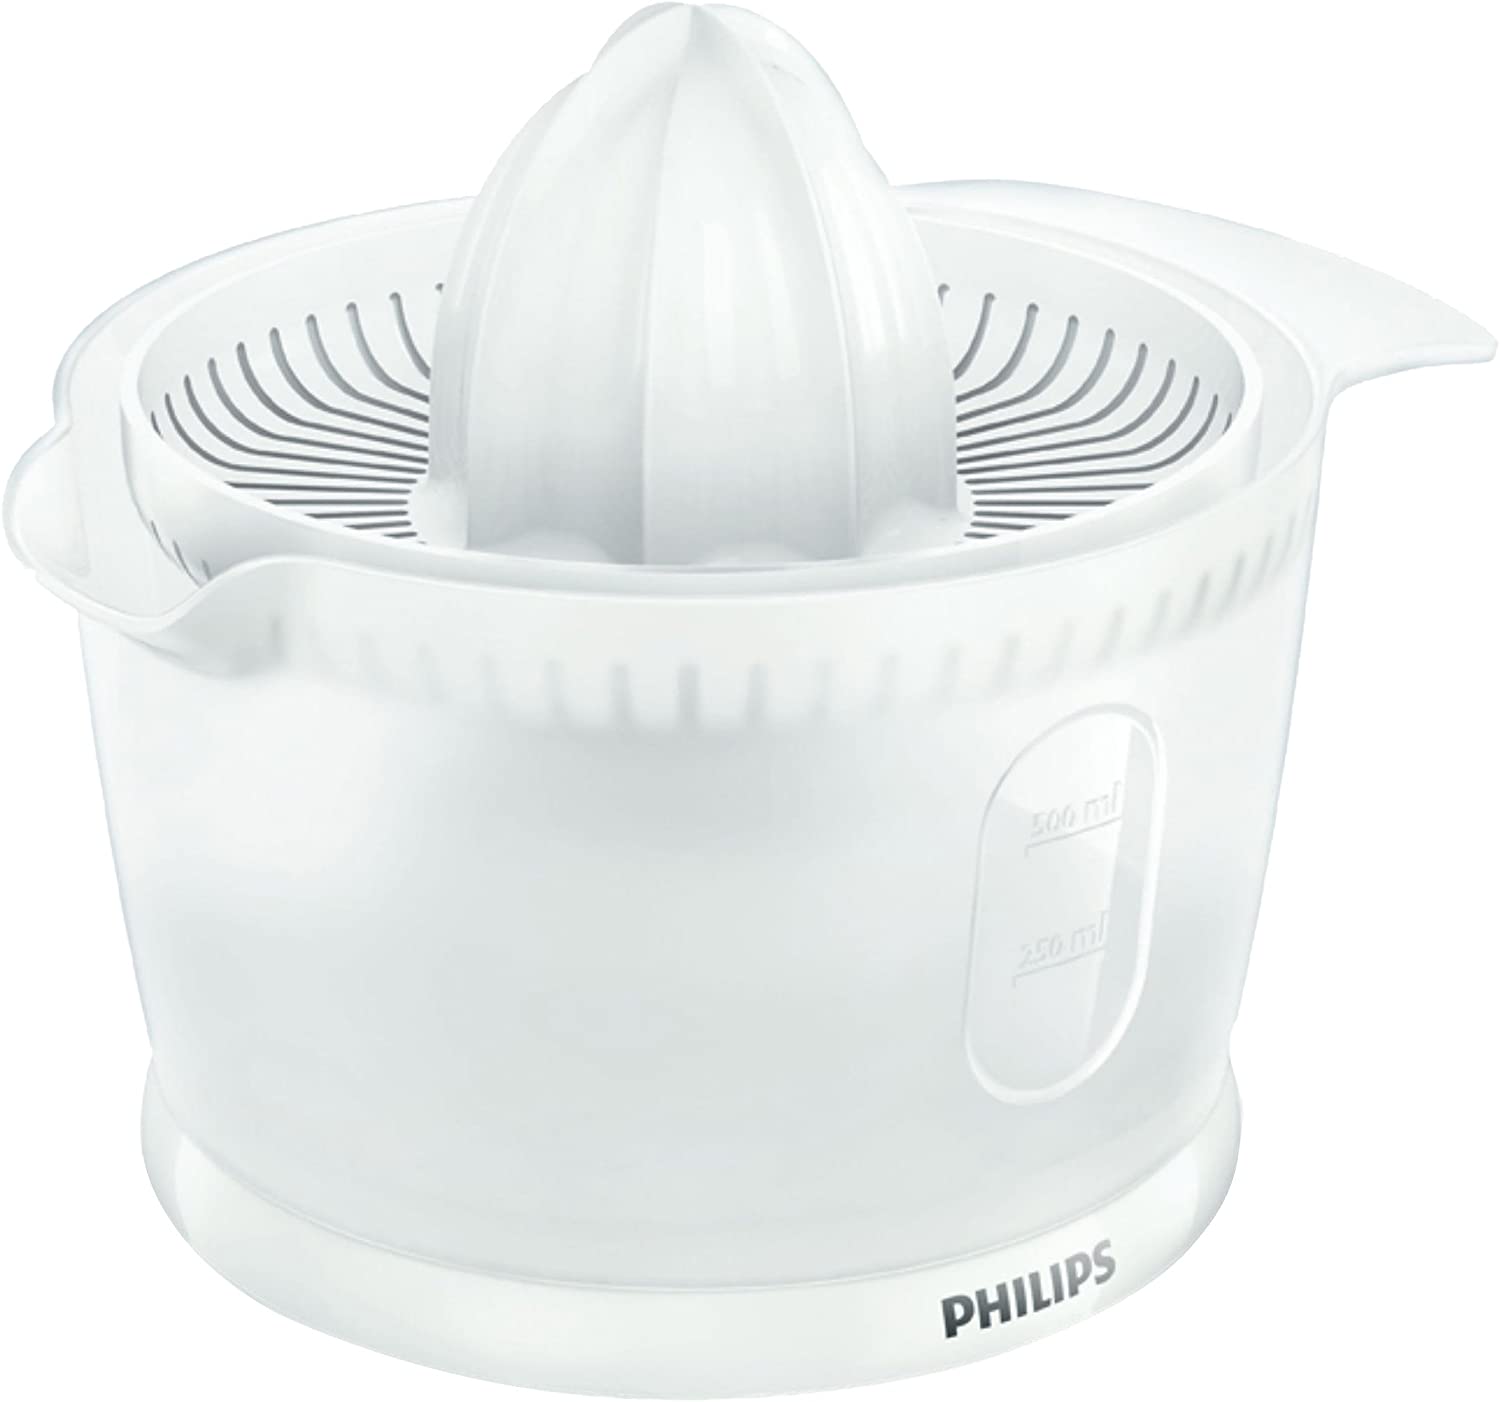 Philips Daily Collection Citrus Press Juicer, White - HR2738